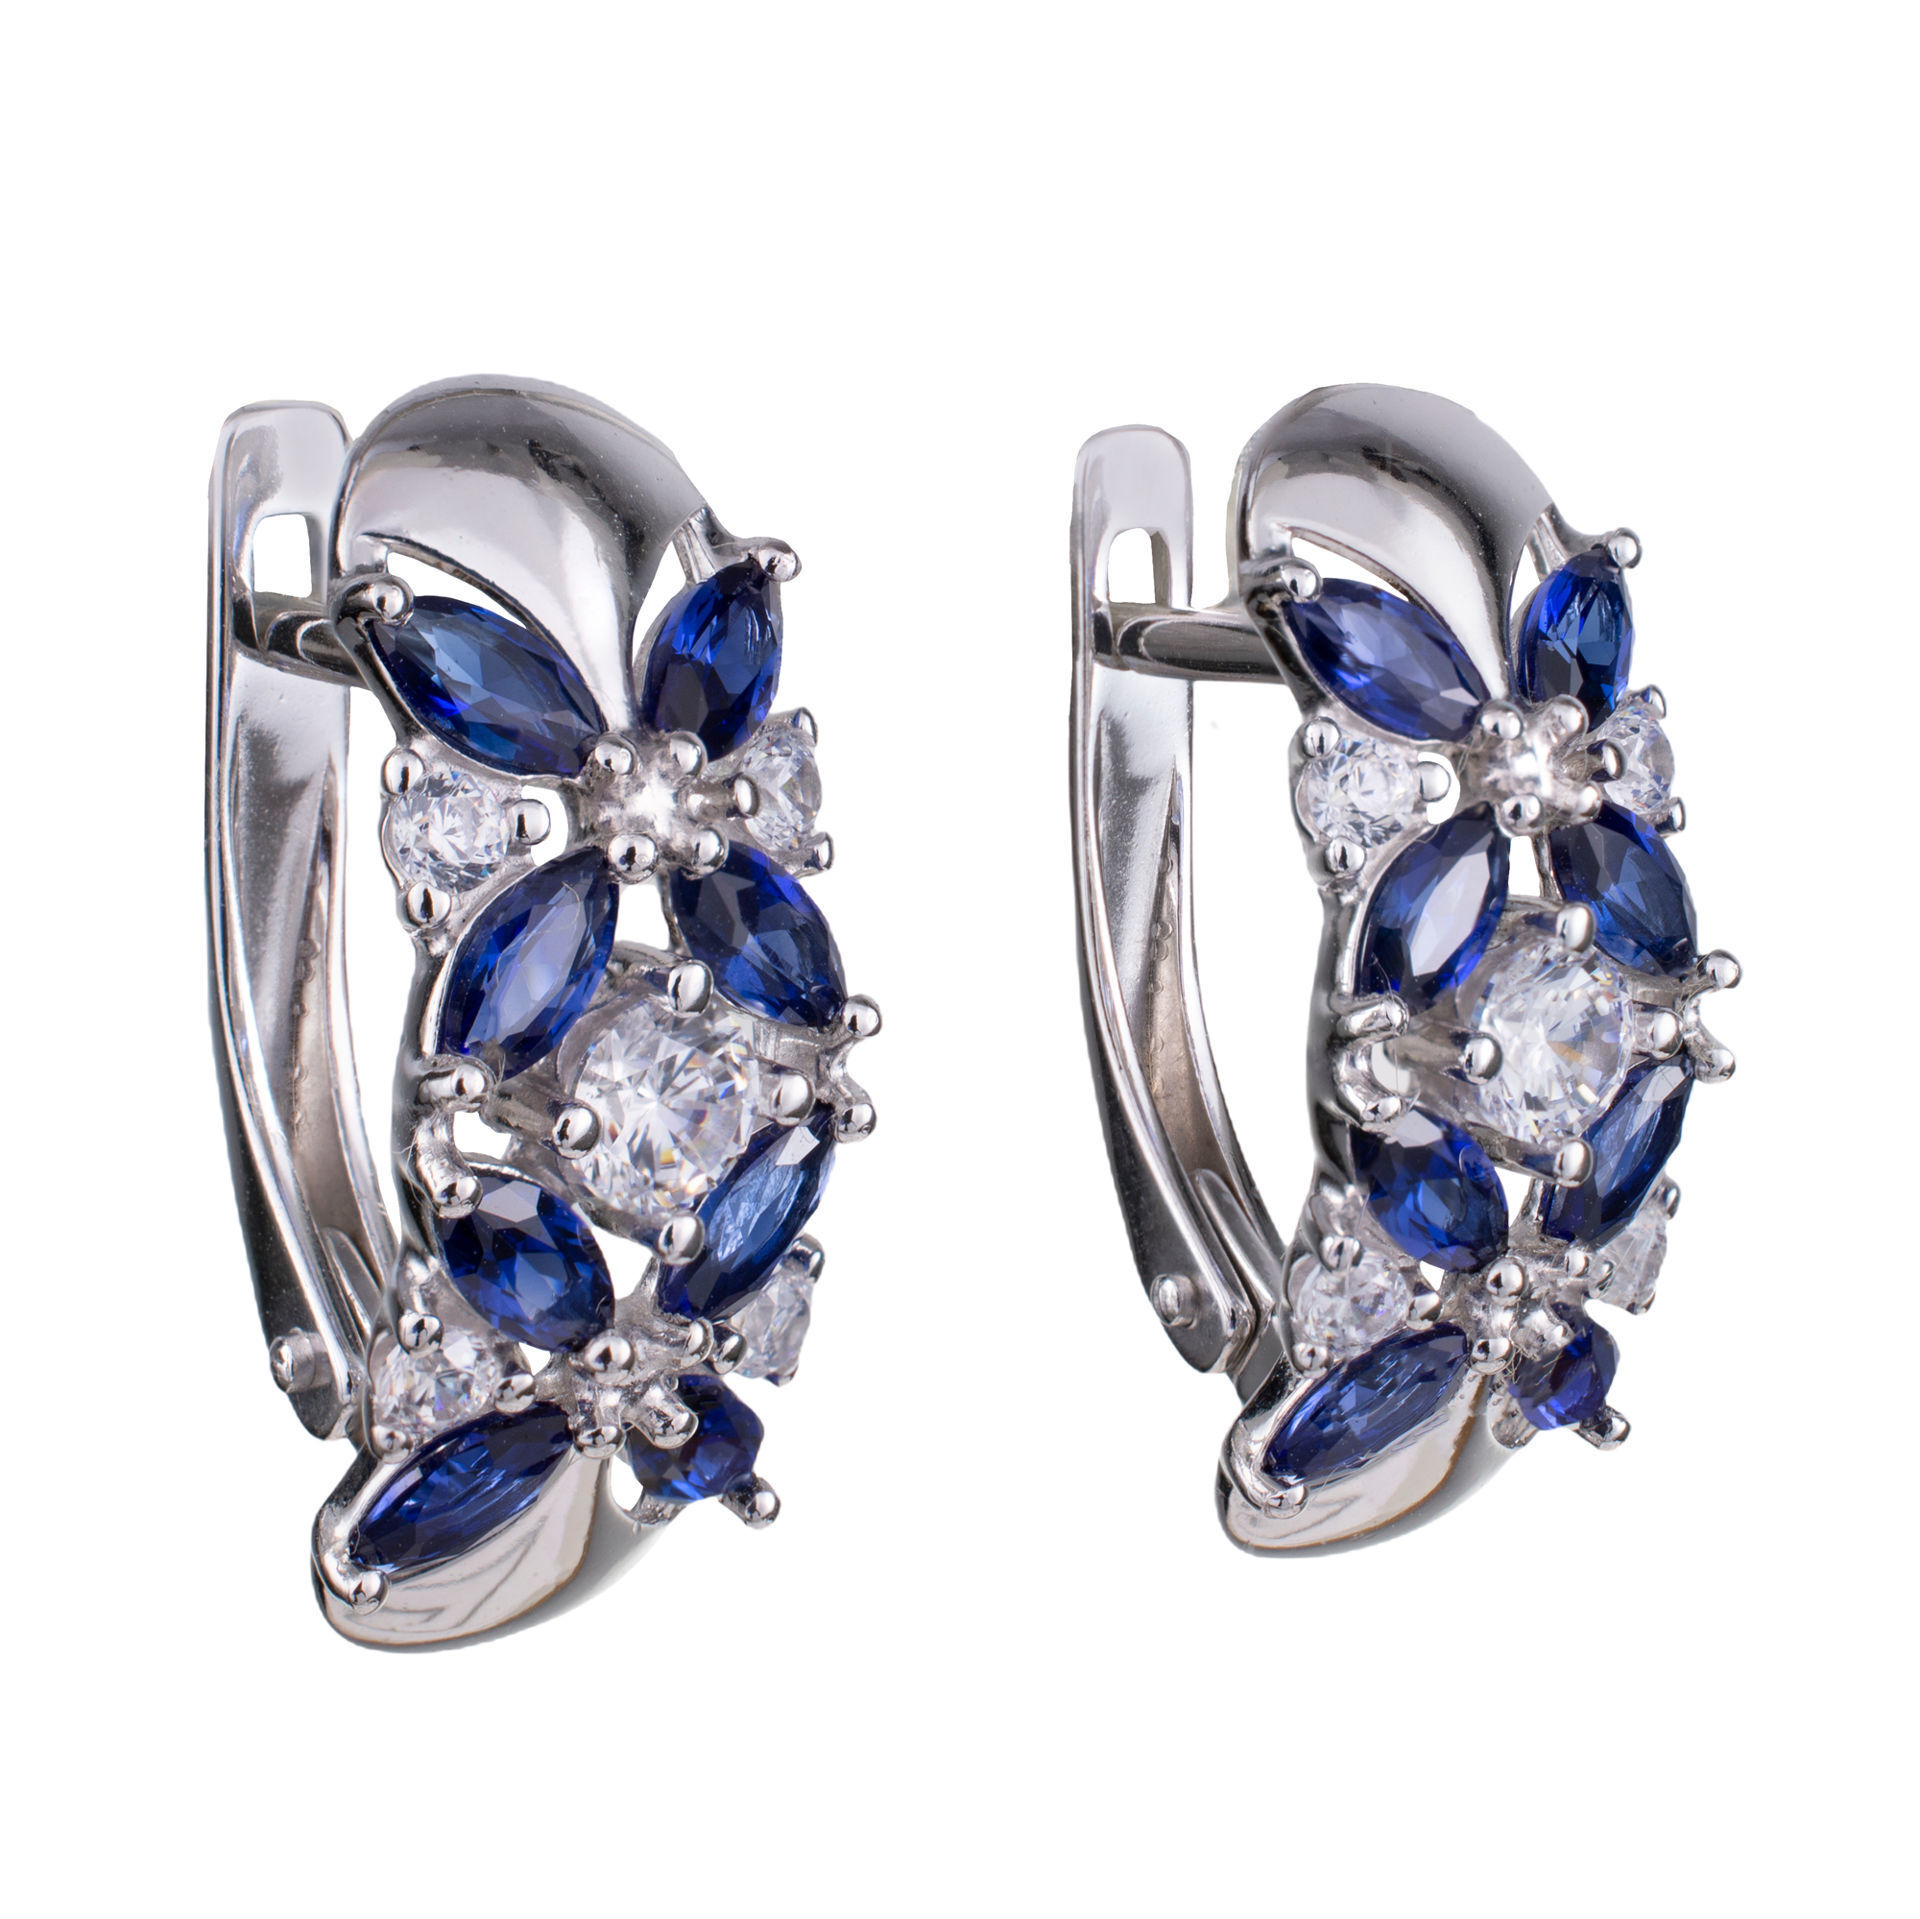 Lab Created Sapphire ampWhite Topaz Halo Stud Earrings 925 Stamped  Sterling Silver  eBay